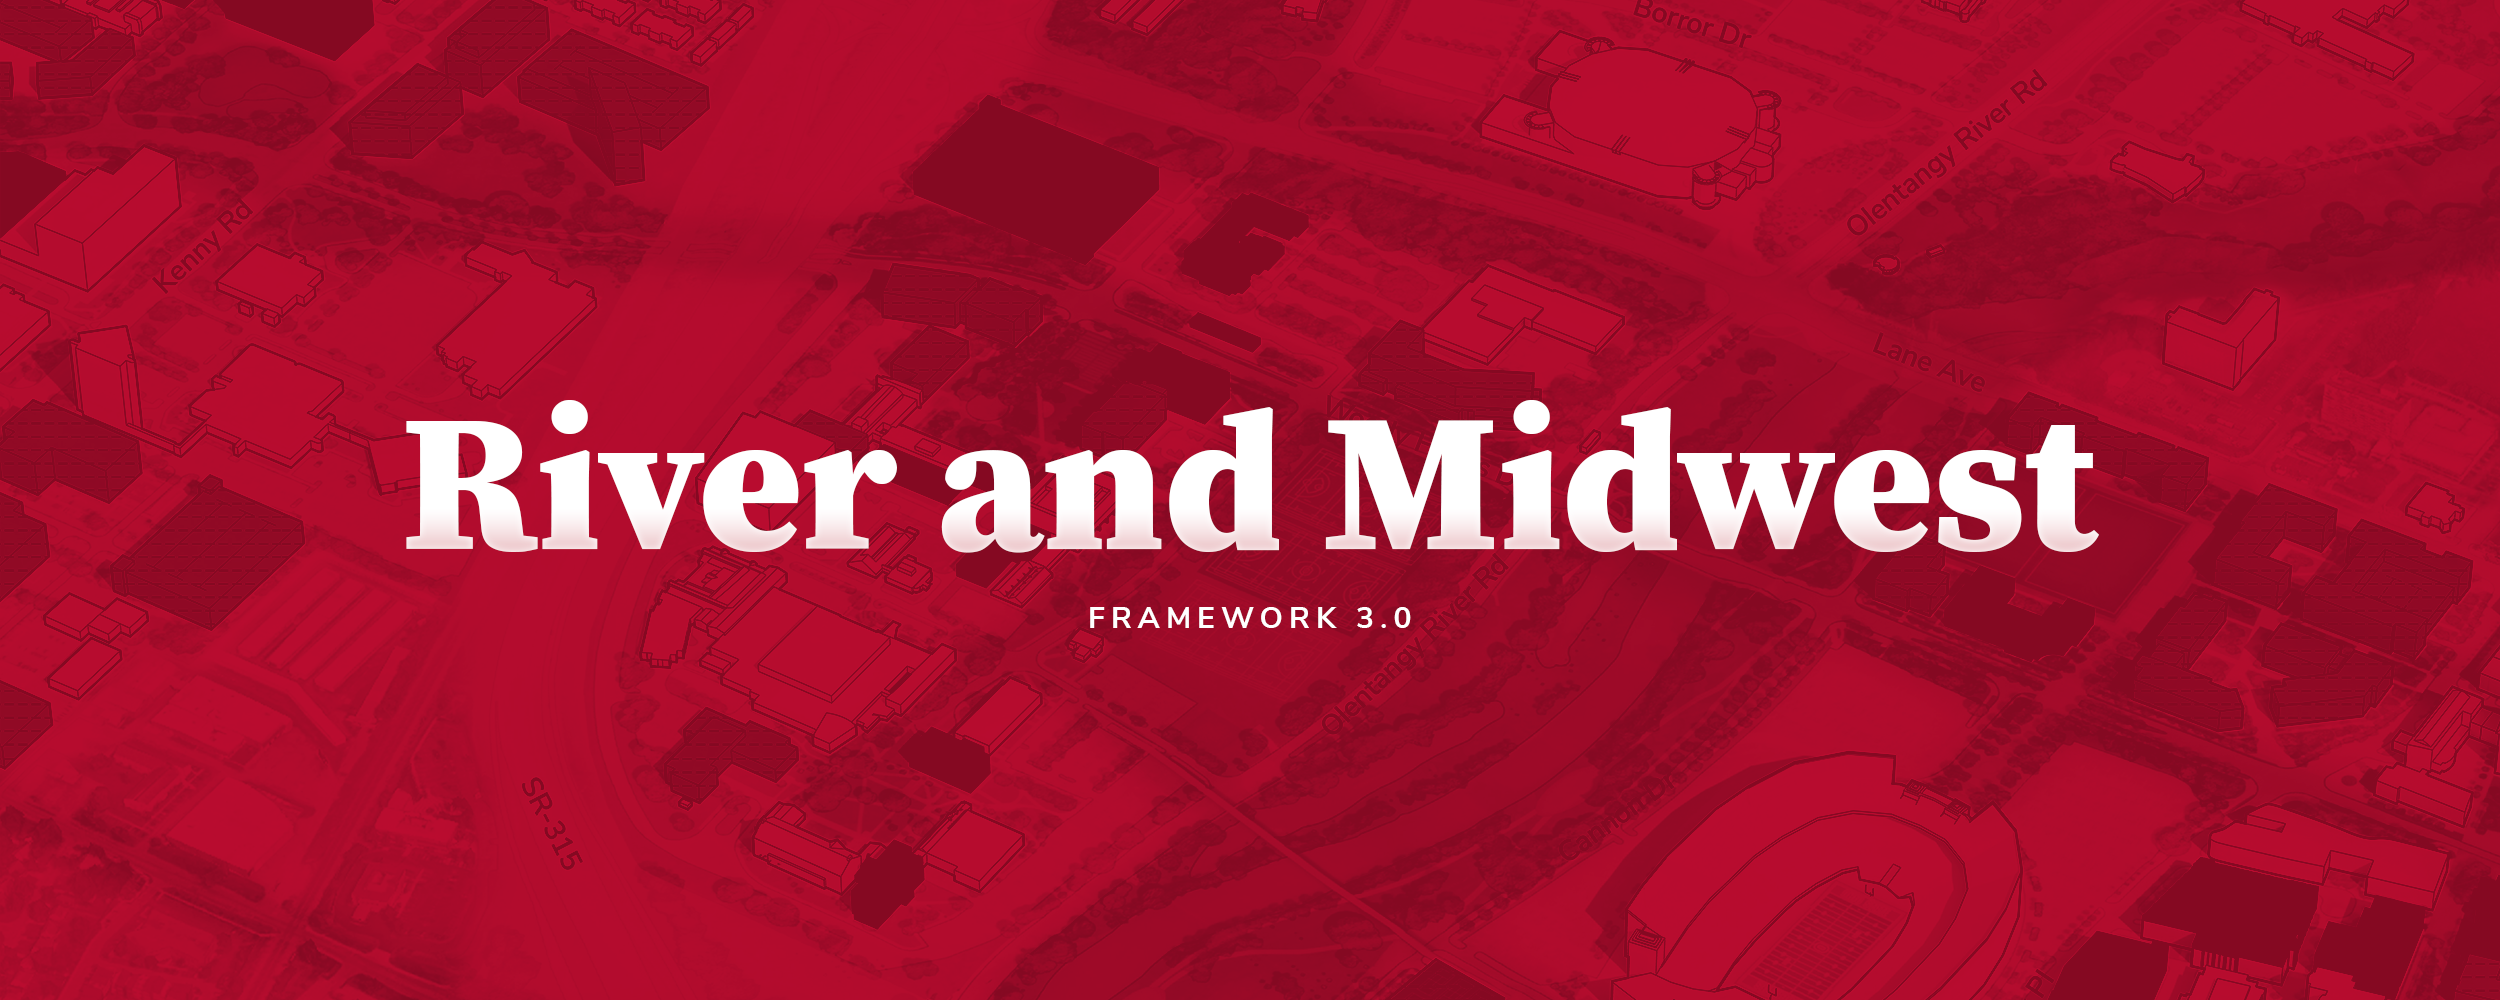 Web banner with text "River and Midwest - Framework 3.0"